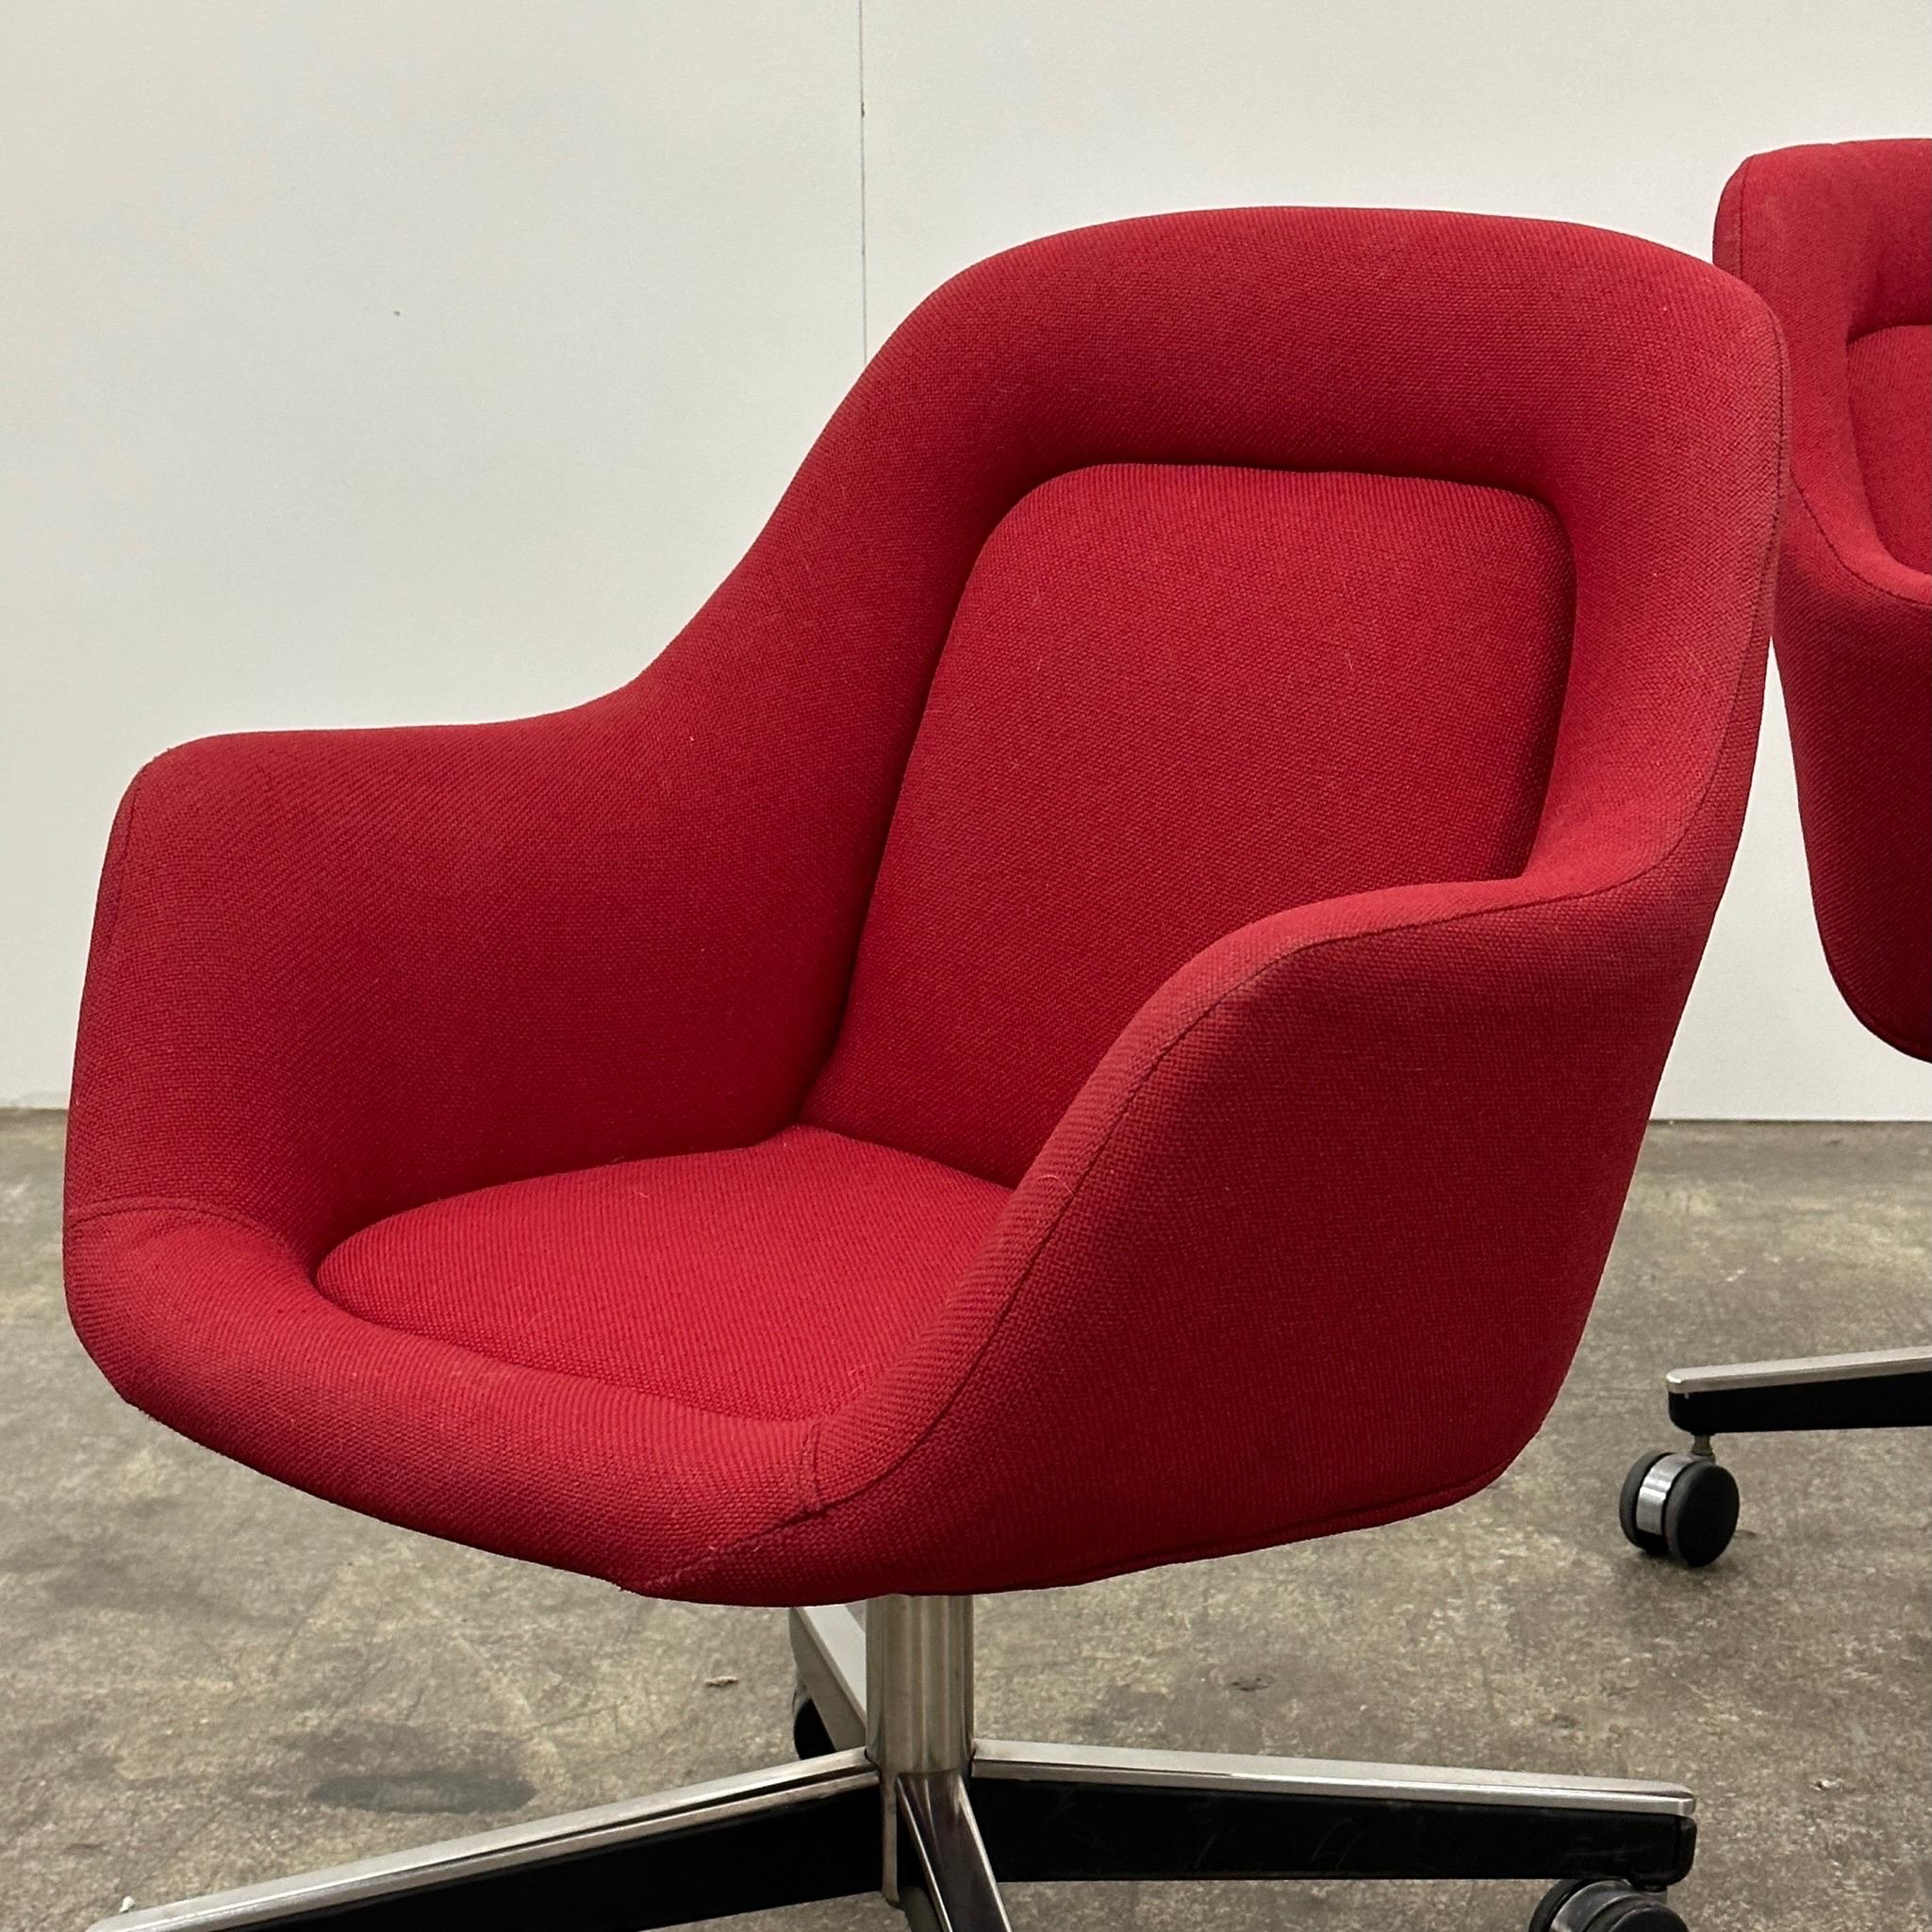 c. 1970s. Price is for the set. Contact us if you’d like to purchase a single item. Pair of desk chairs by Knoll, fully upholstered with swivel base. 